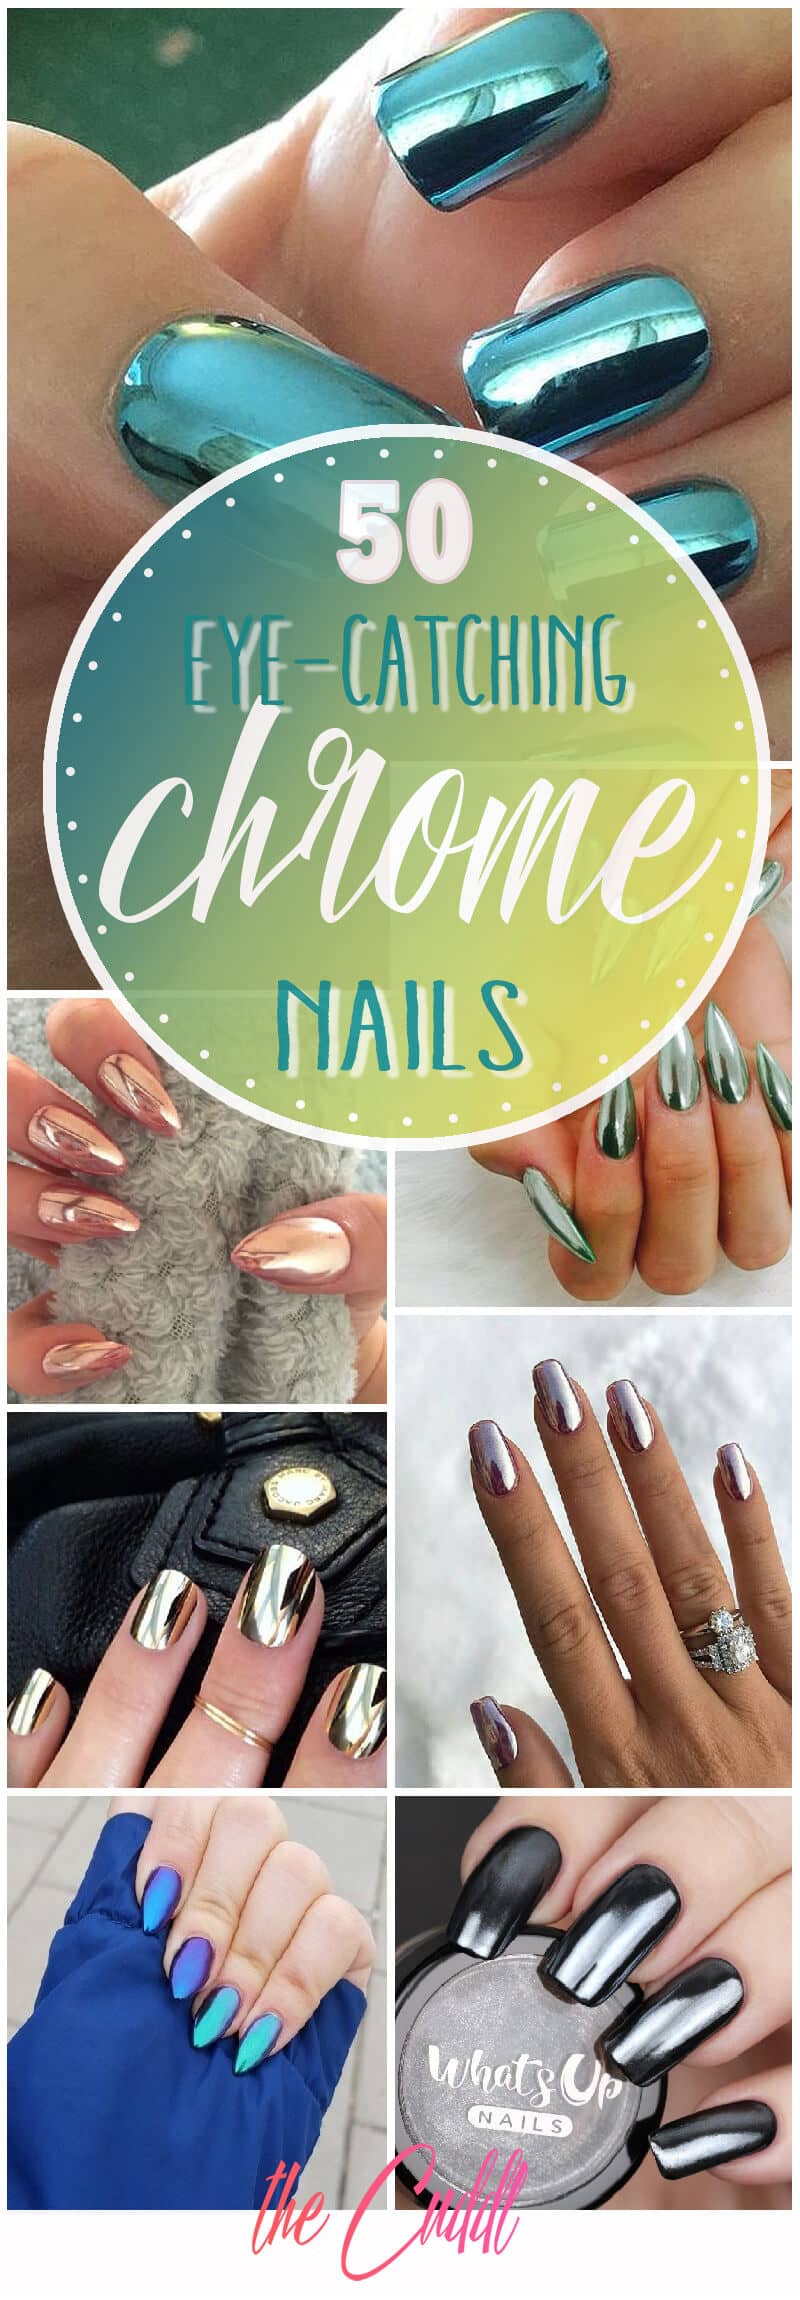 50 Eye-Catching Chrome Nails to Revolutionize Your Nail Game